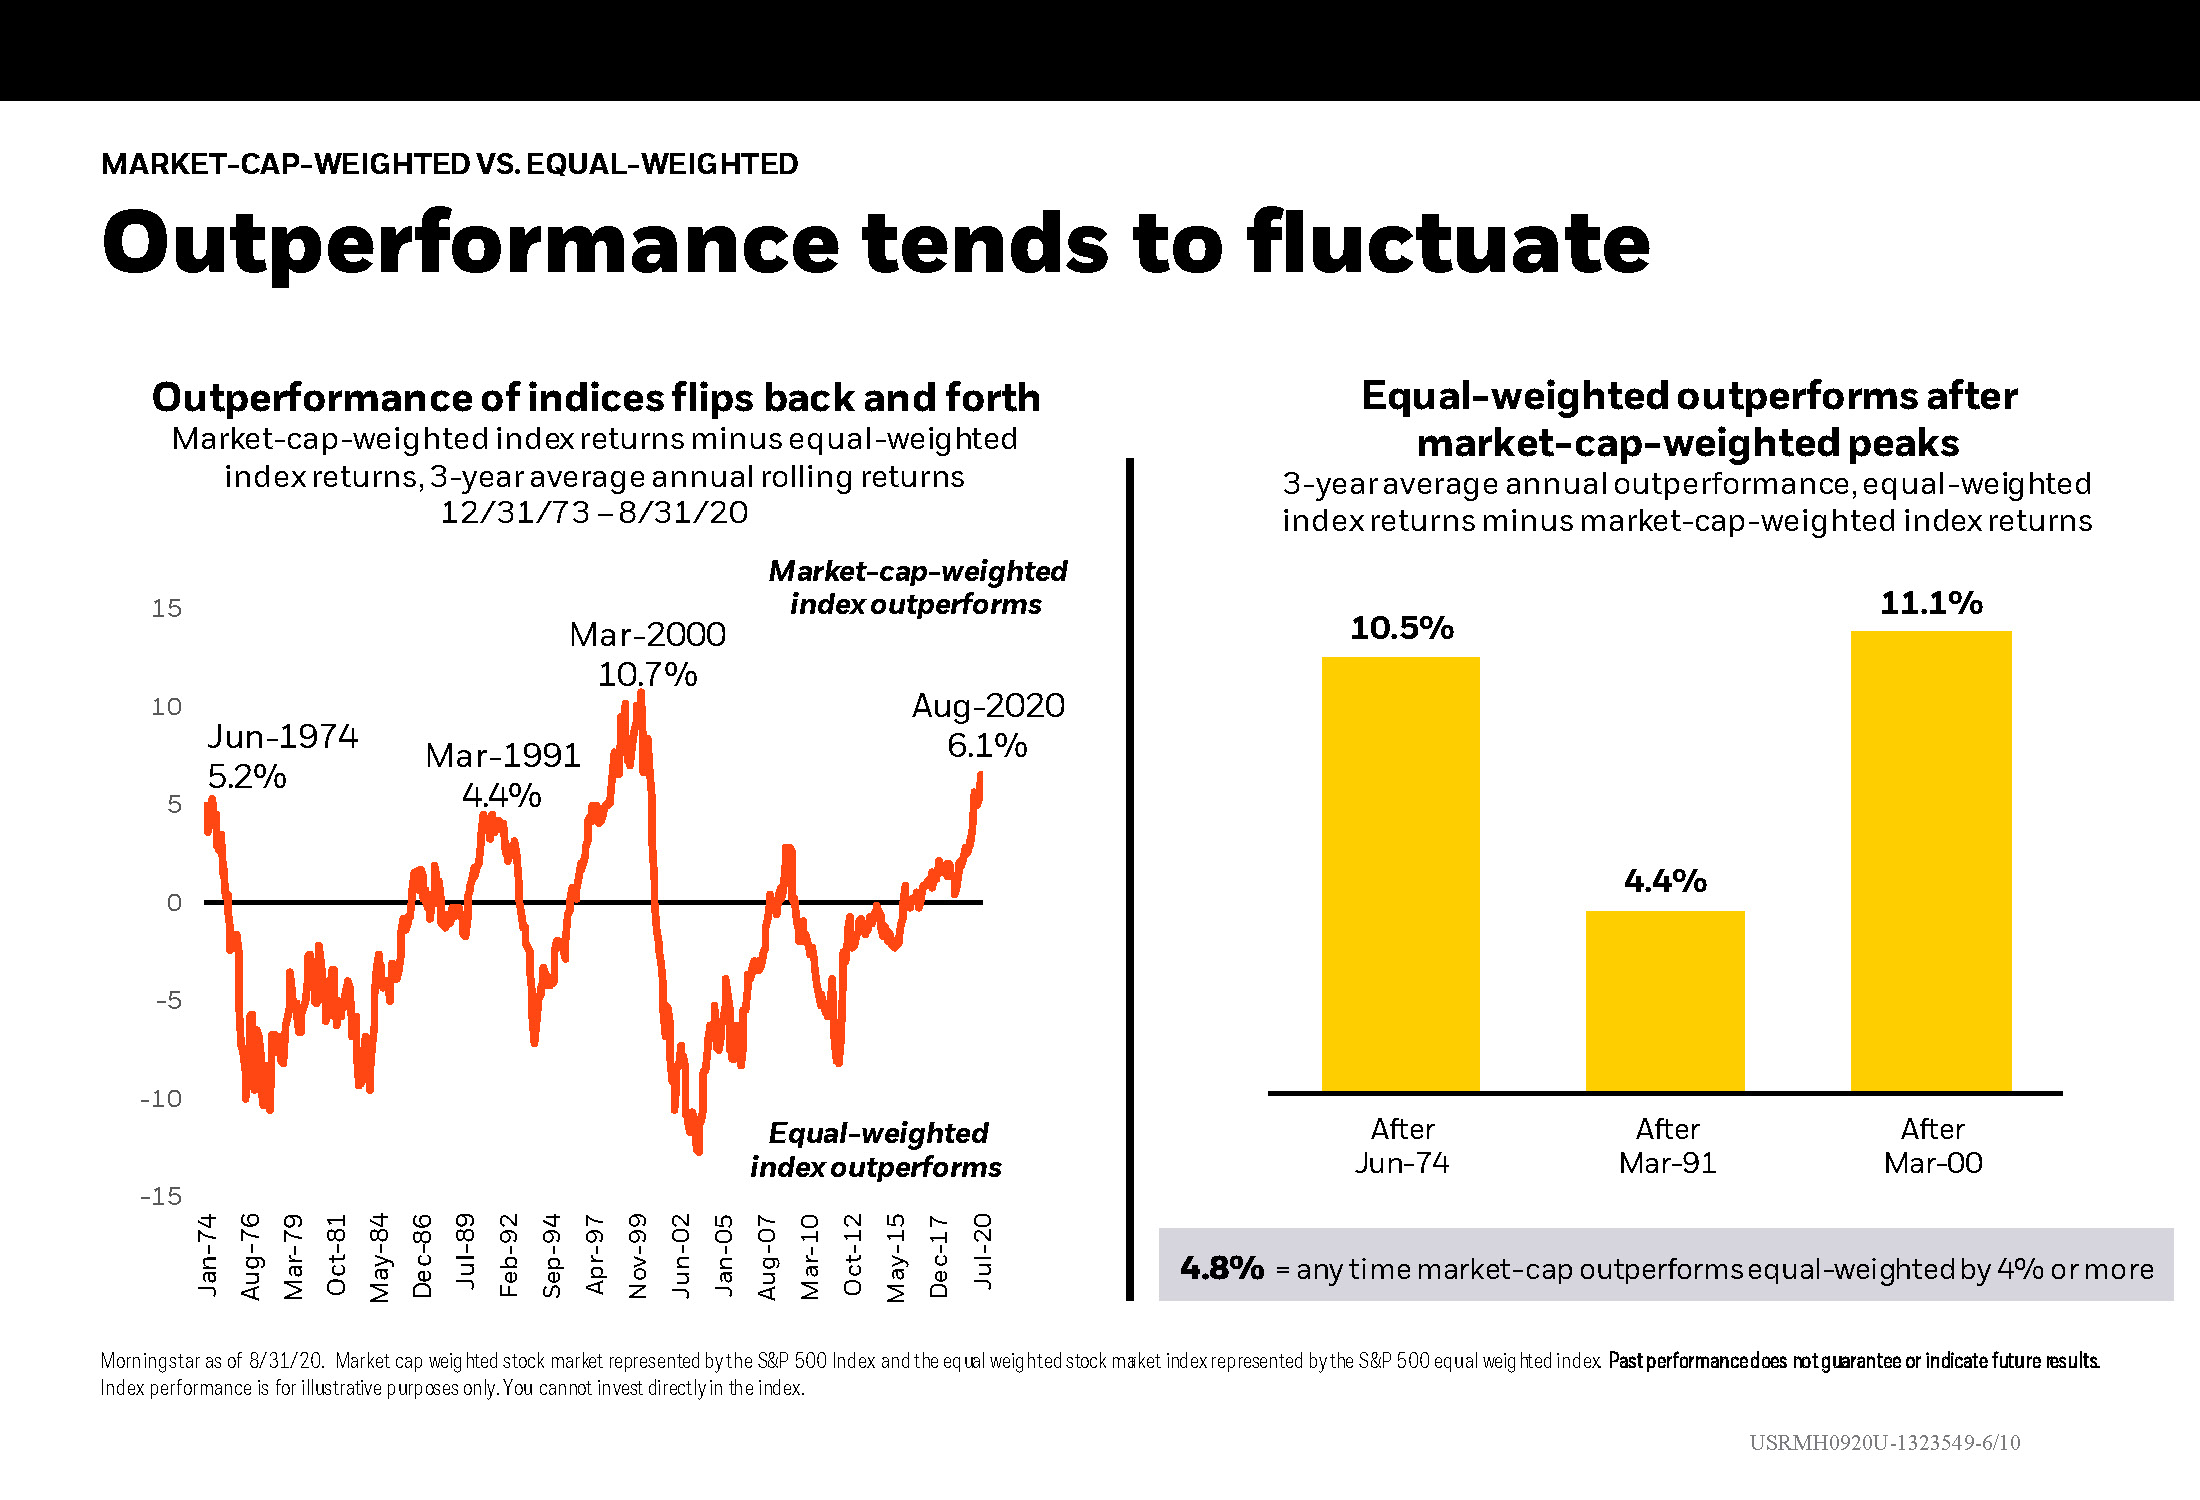 Outperformance tends to fluctuate